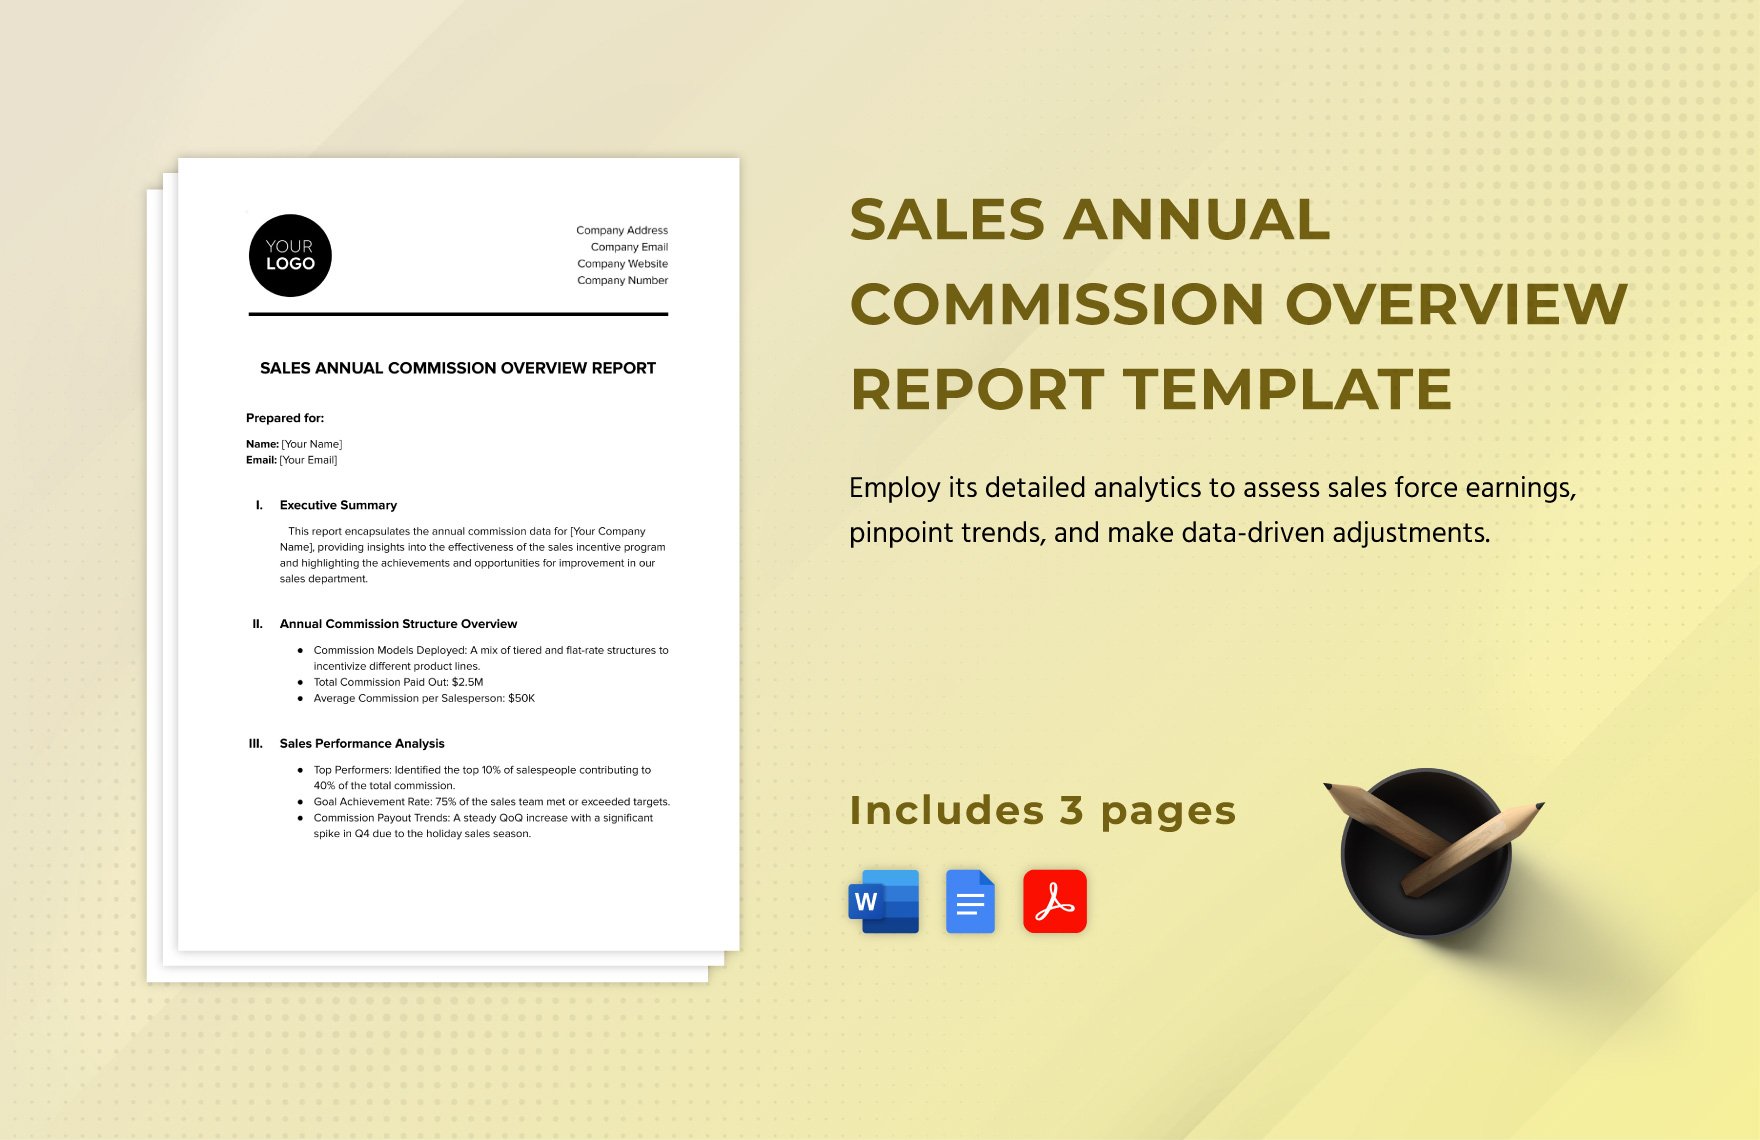 Sales Annual Commission Overview Report Template